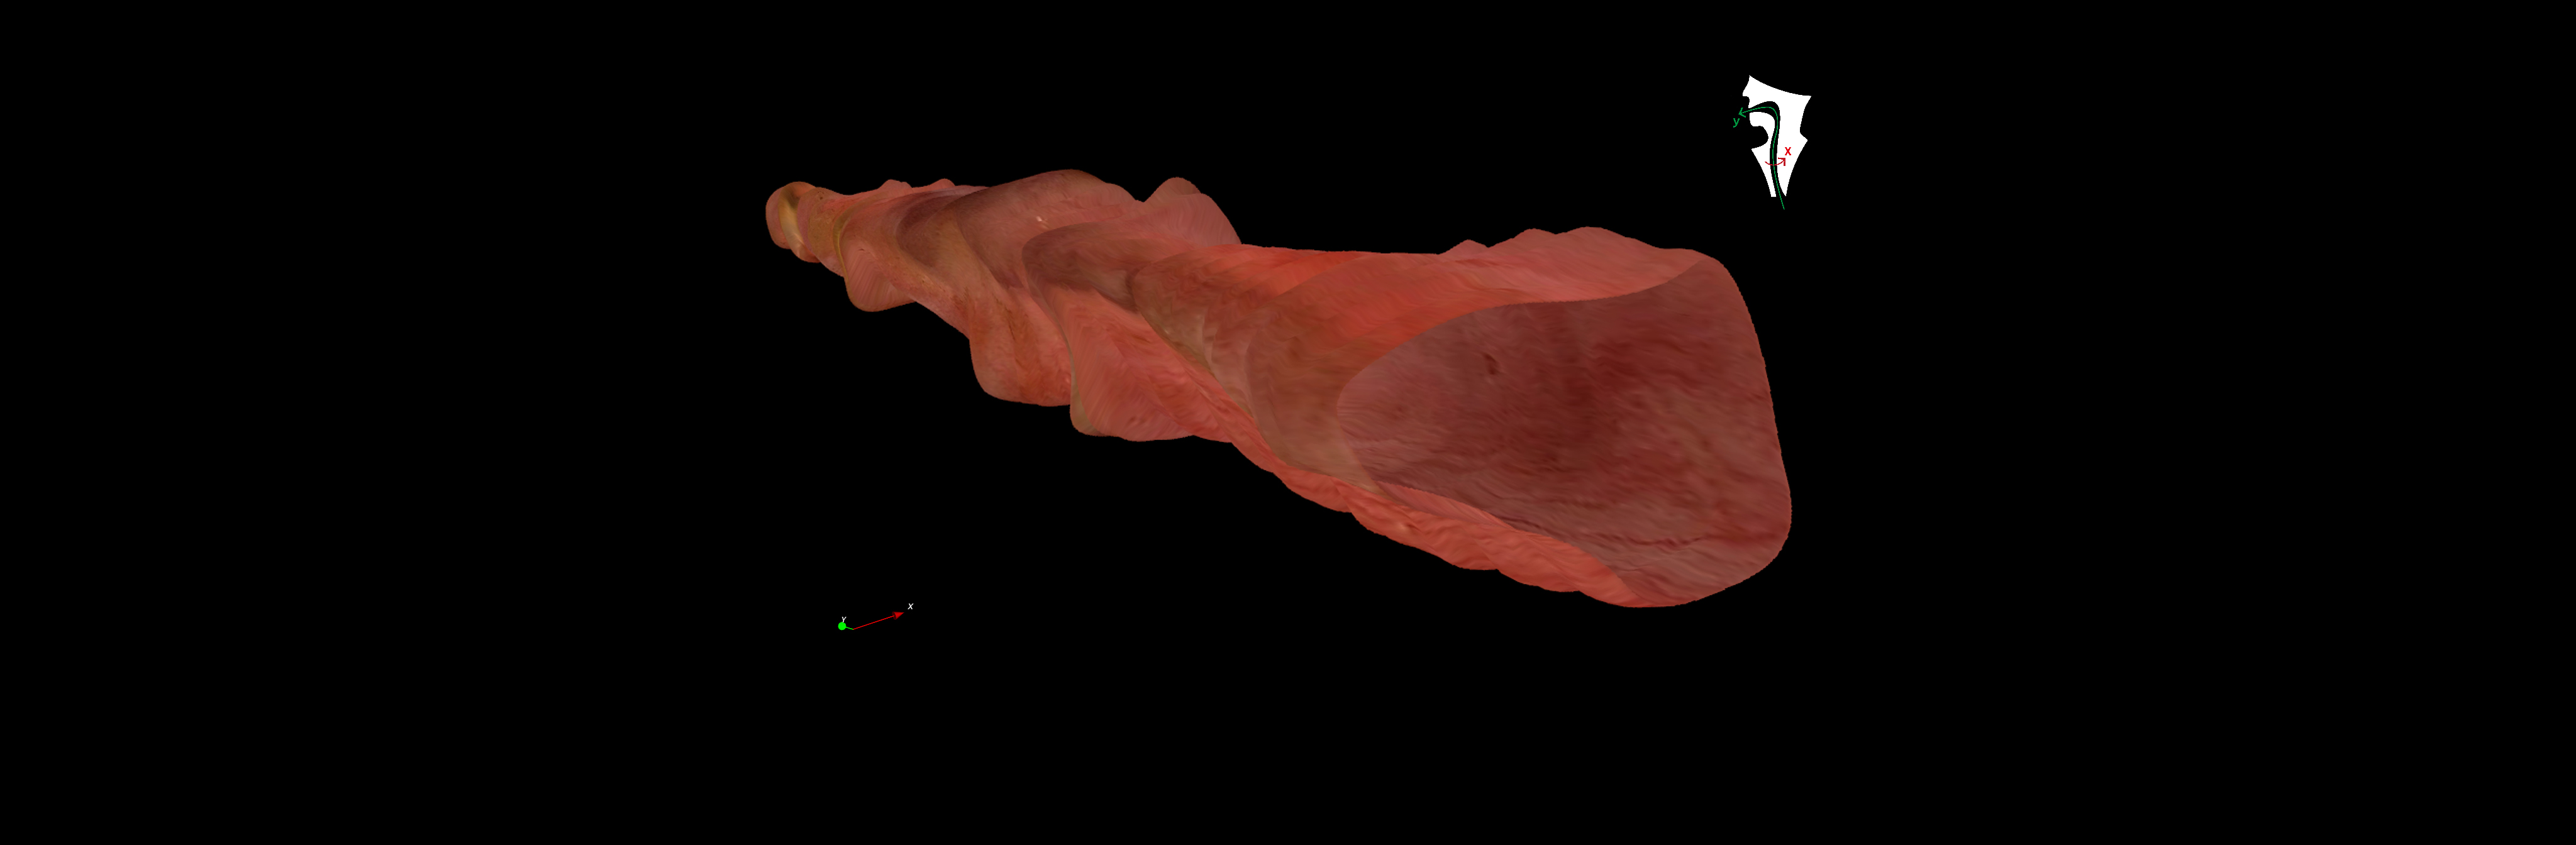 TubeStitcher – Panoramic Mapping of the Esophagus